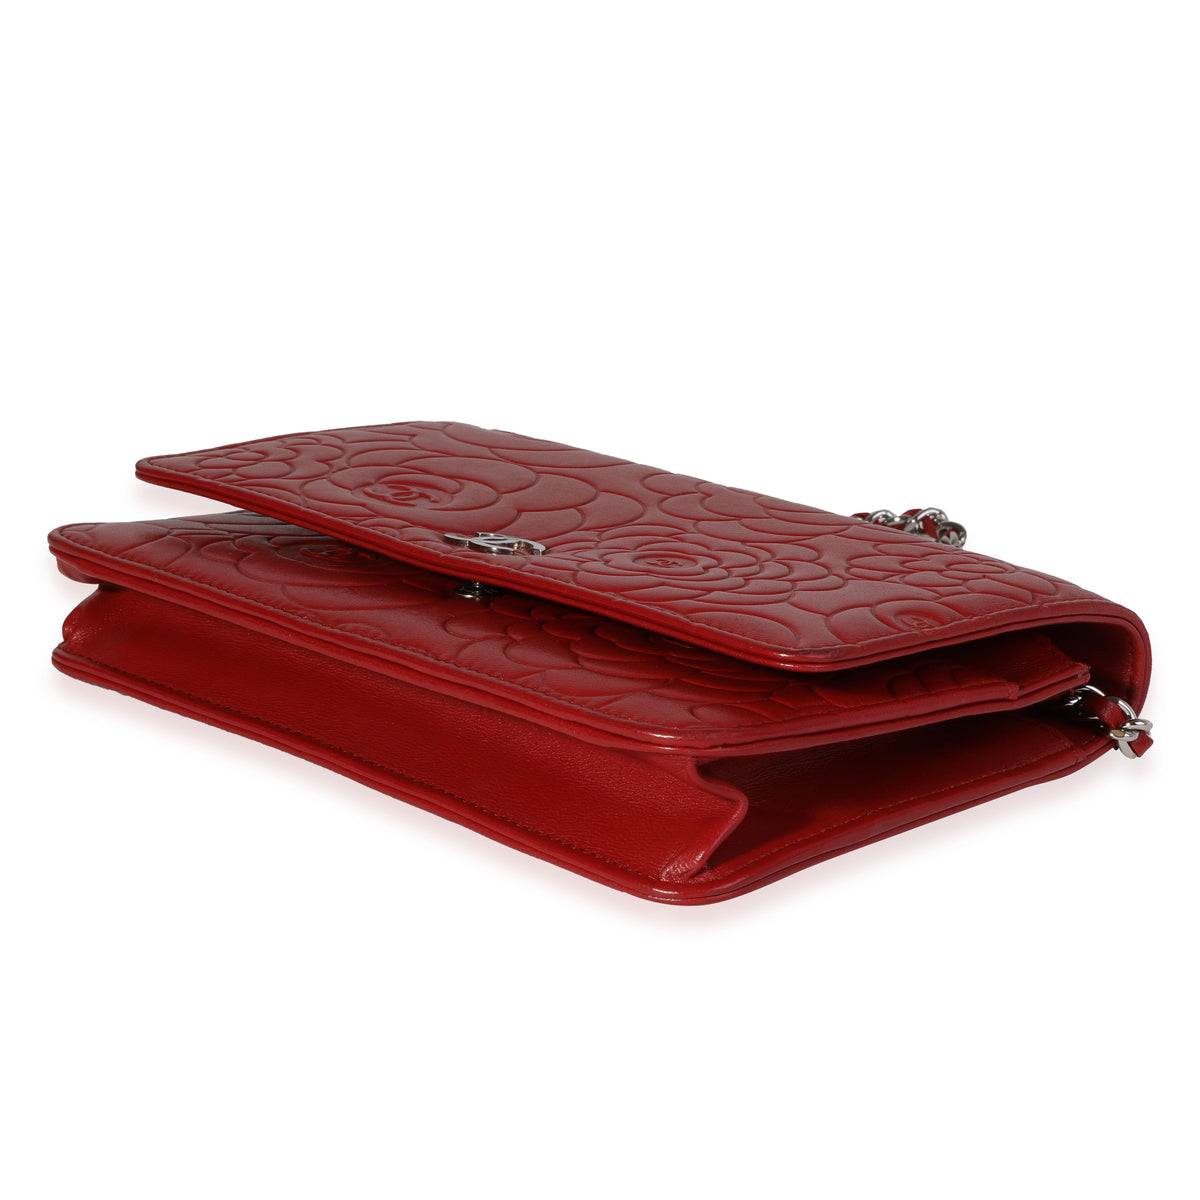 Chanel Red Camellia-Embossed Leather Wallet on Chain, myGemma